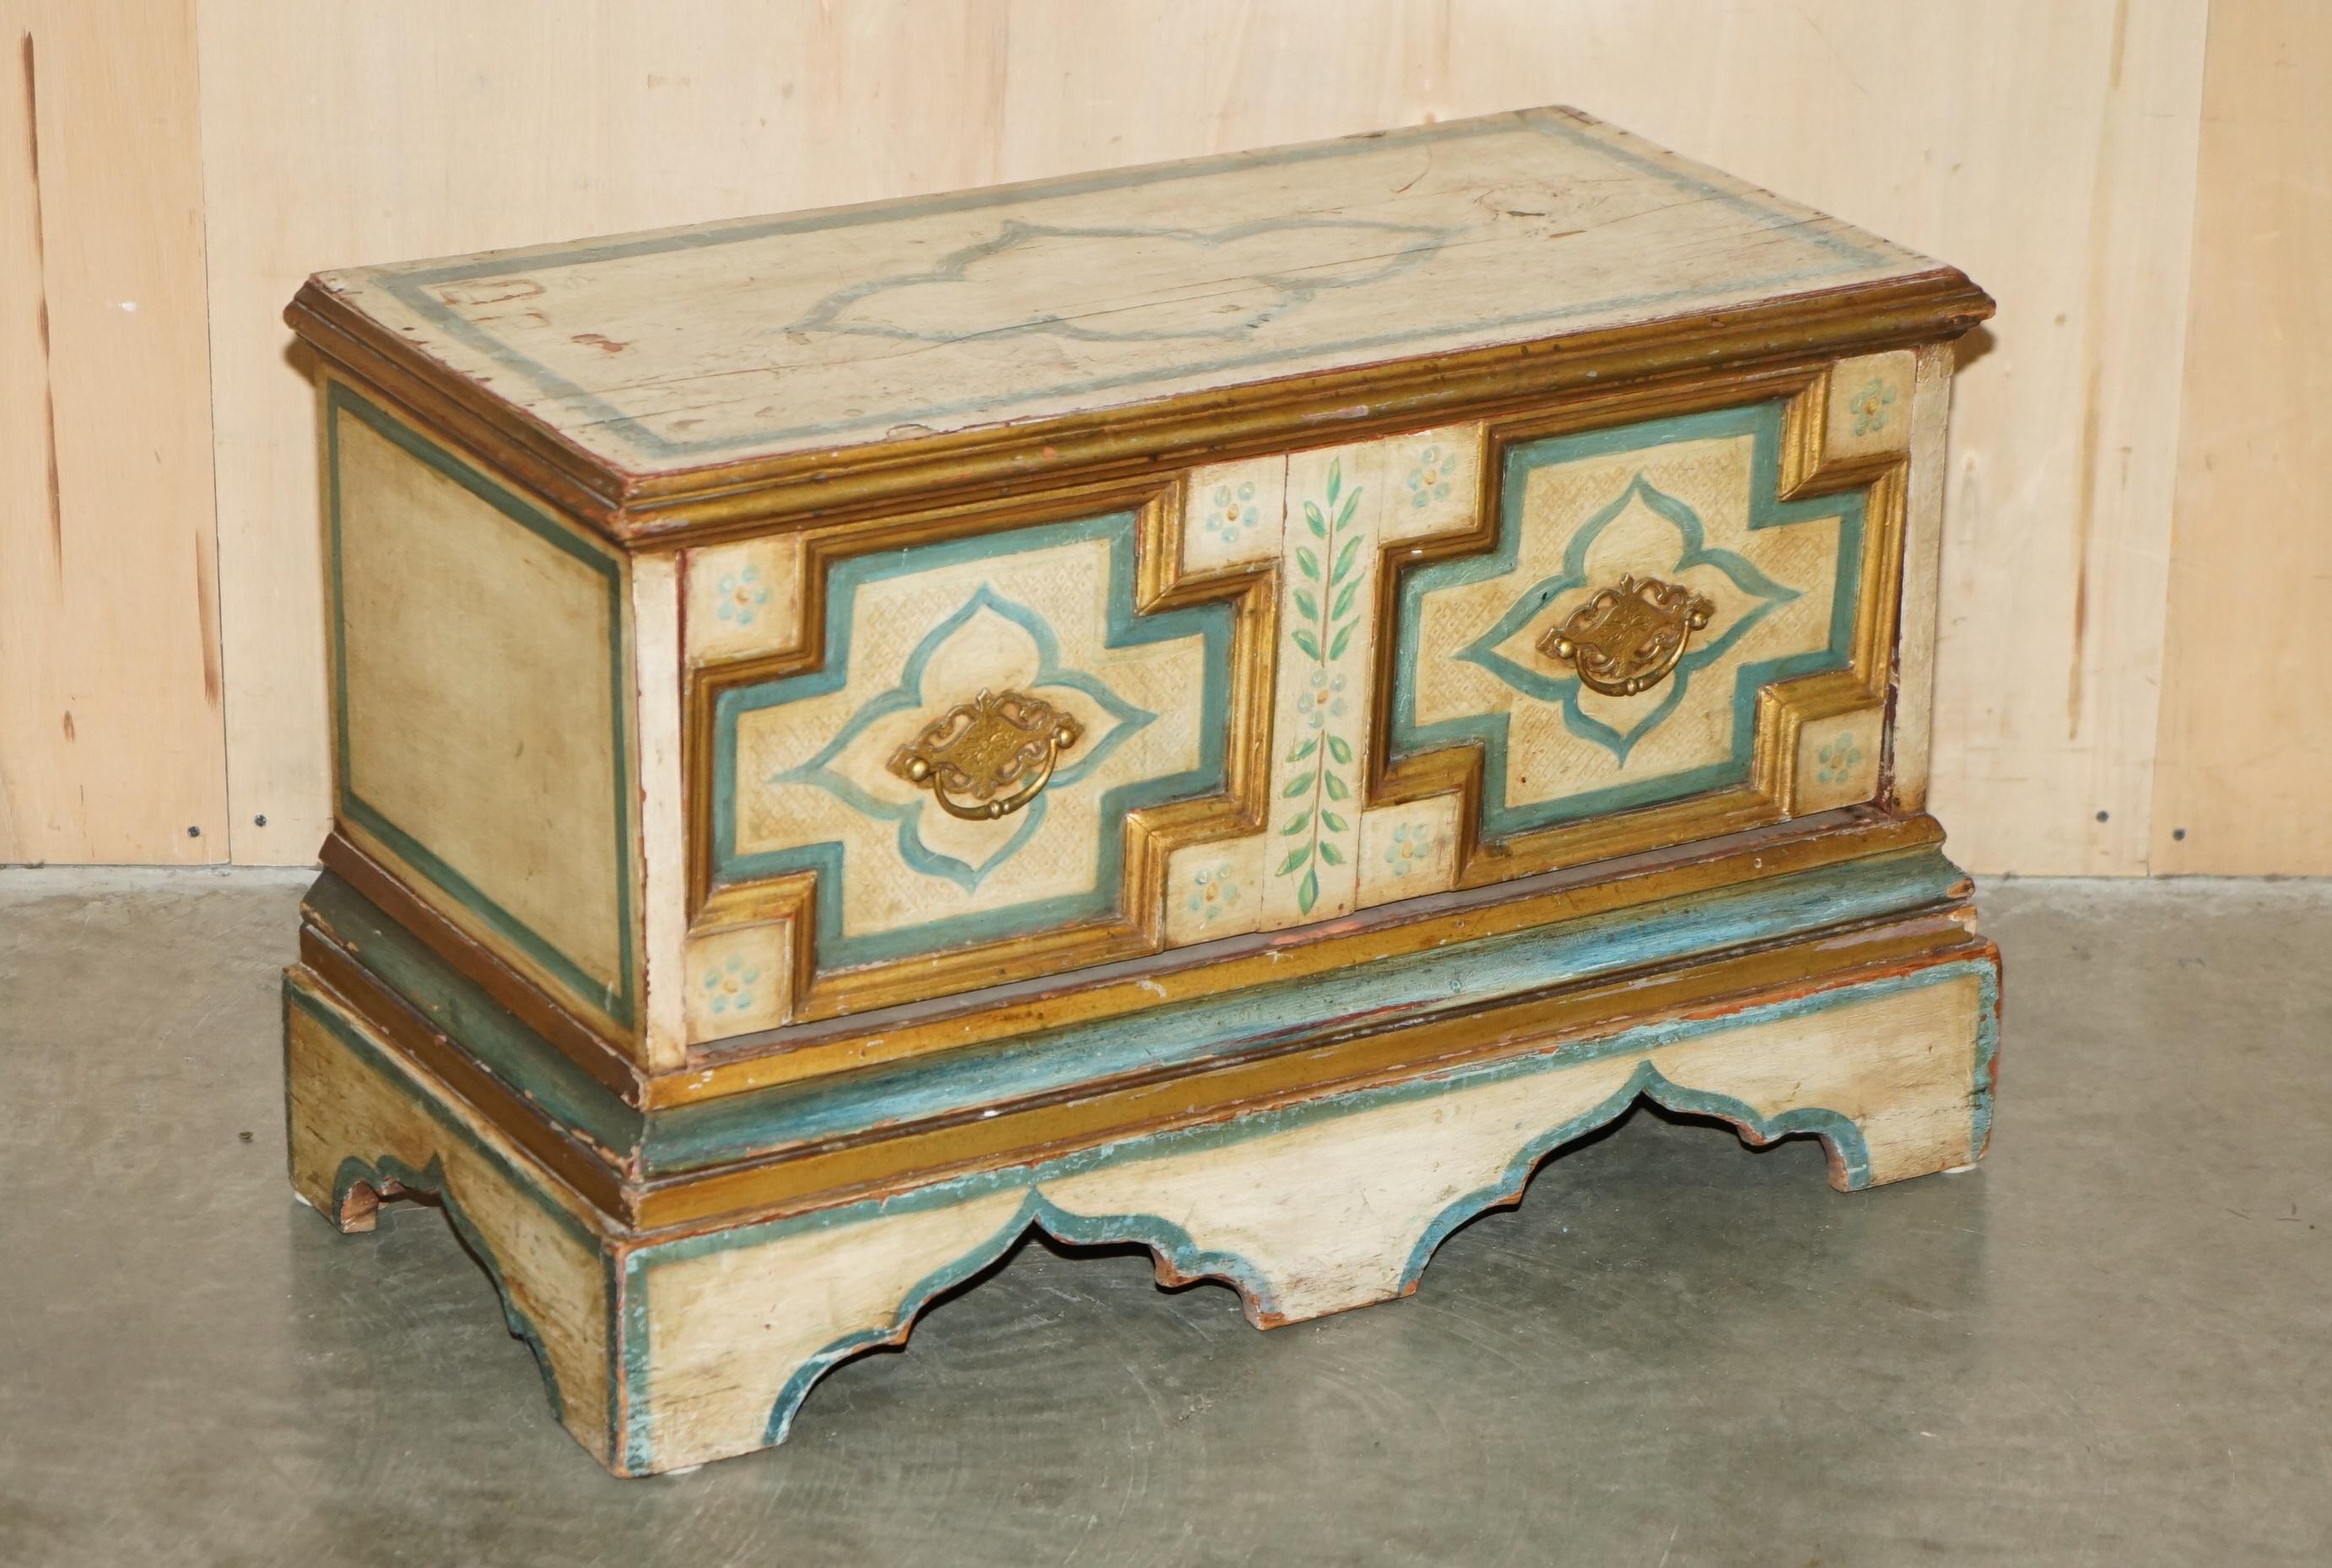 Royal House Antiques

Royal House Antiques is delighted to offer for sale this lovely original circa 1930's hand painted storage trunk or chest with full sized single drawer

Please note the delivery fee listed is just a guide, it covers within the